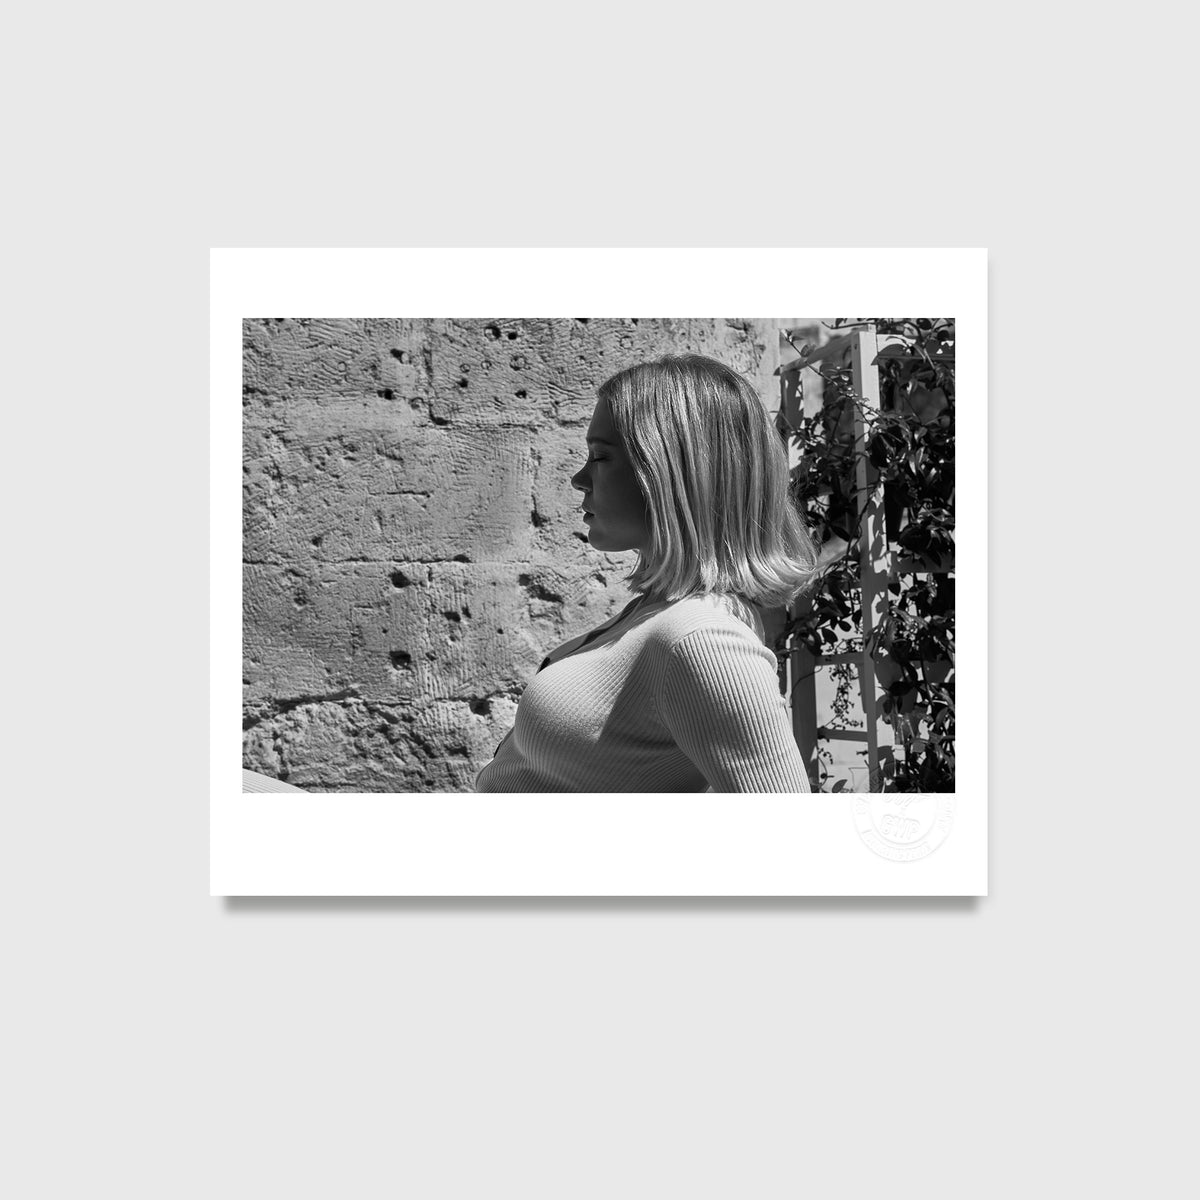 Léa Seydoux In Matera (2019) Studio Stamped Print - By Greg Williams Photography